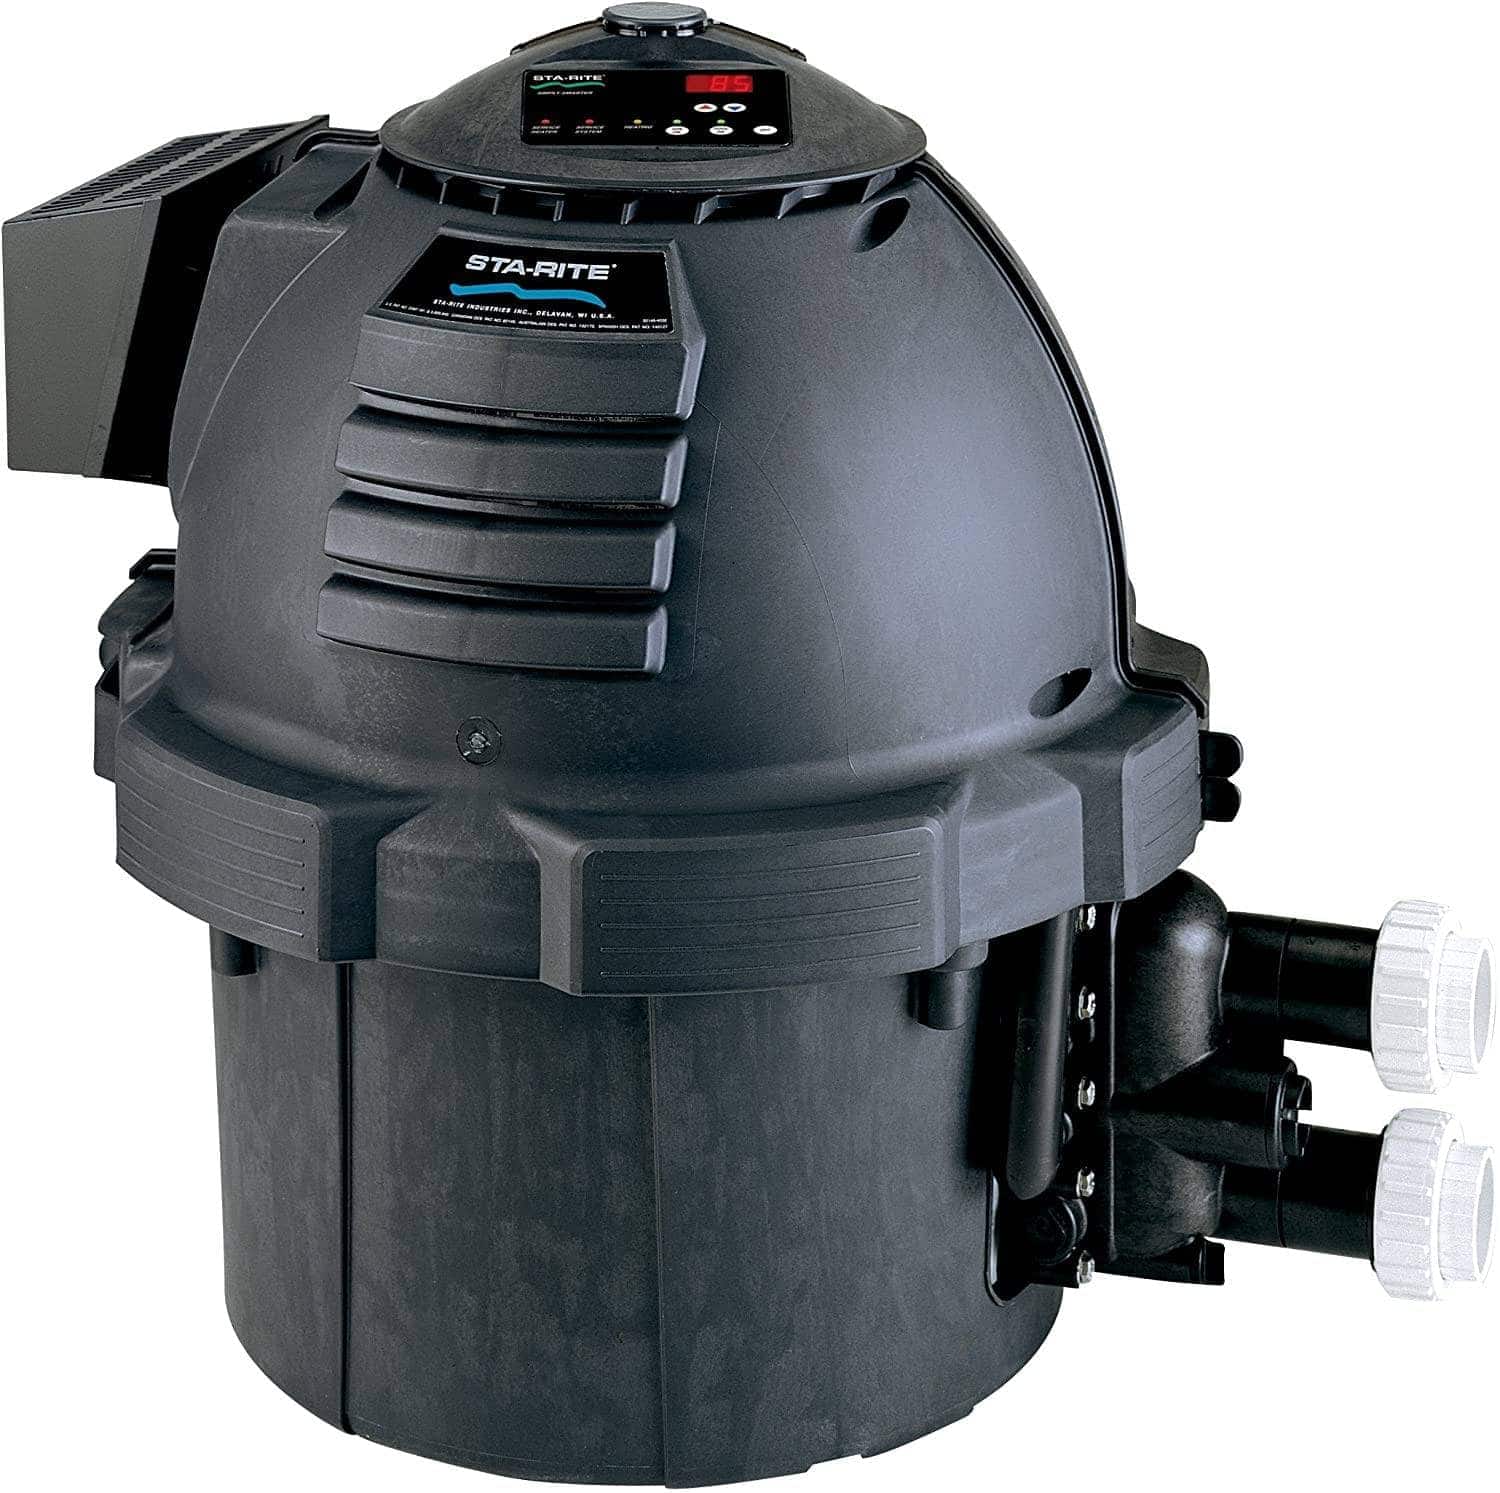 gas-vs-electric-pool-heater-what-s-the-difference-house-grail